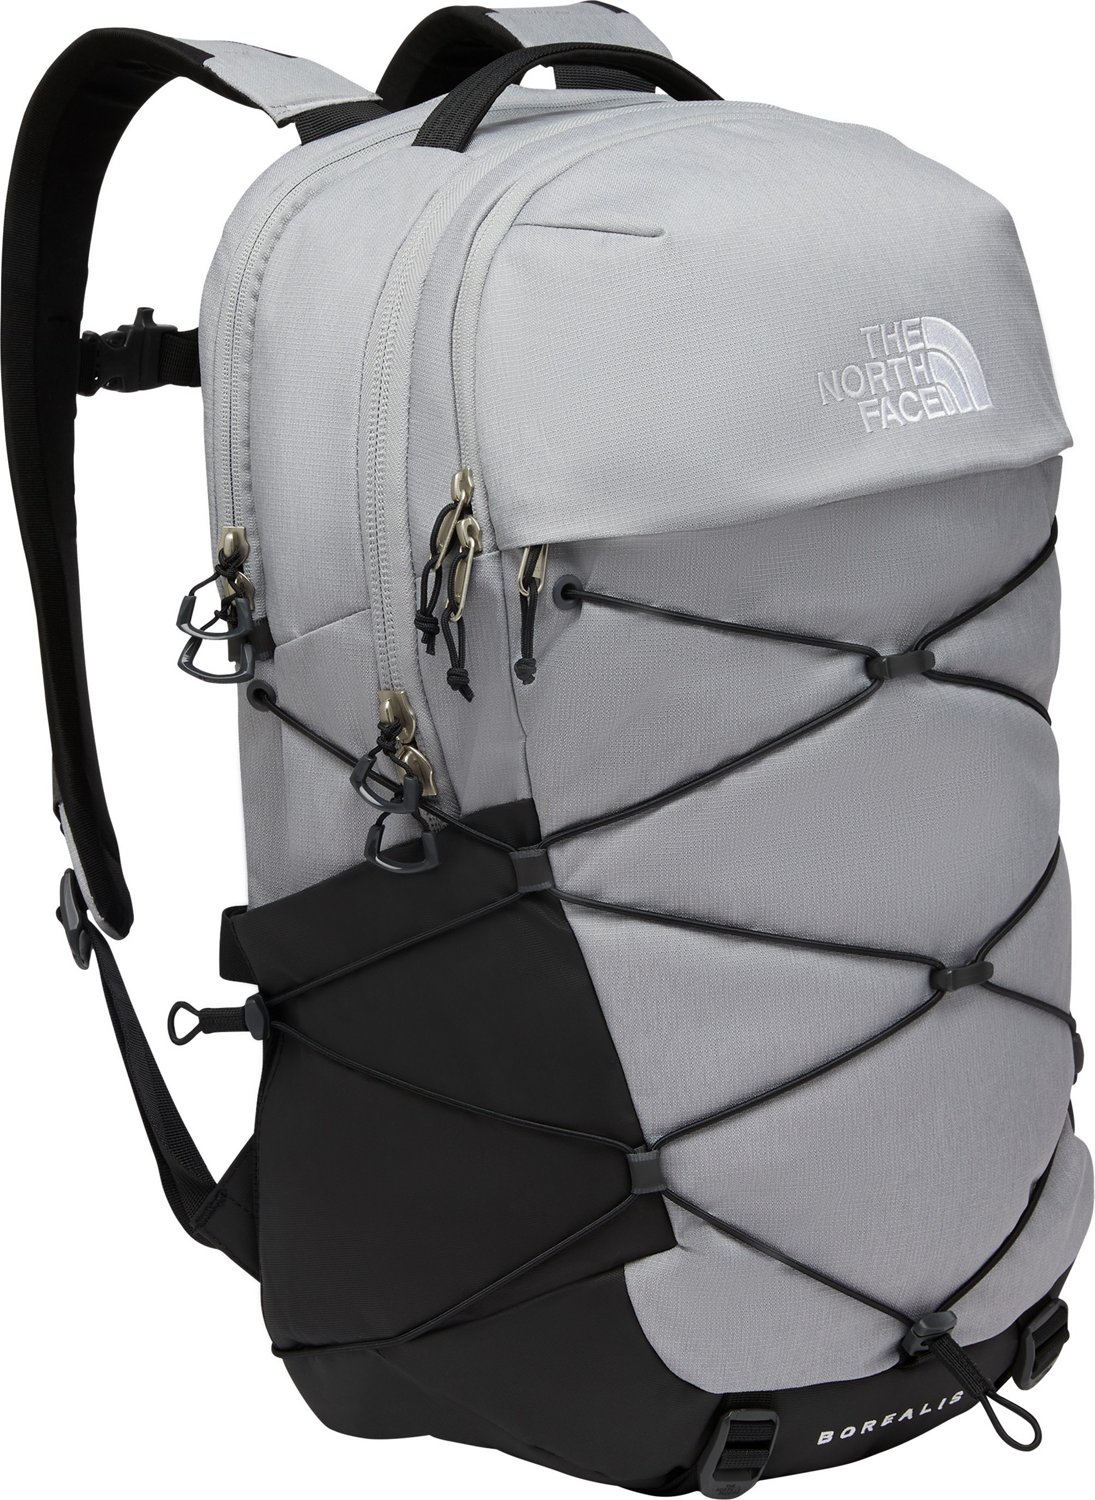 The North Face Men’s Borealis Backpack                                                                                         - view number 1 selected